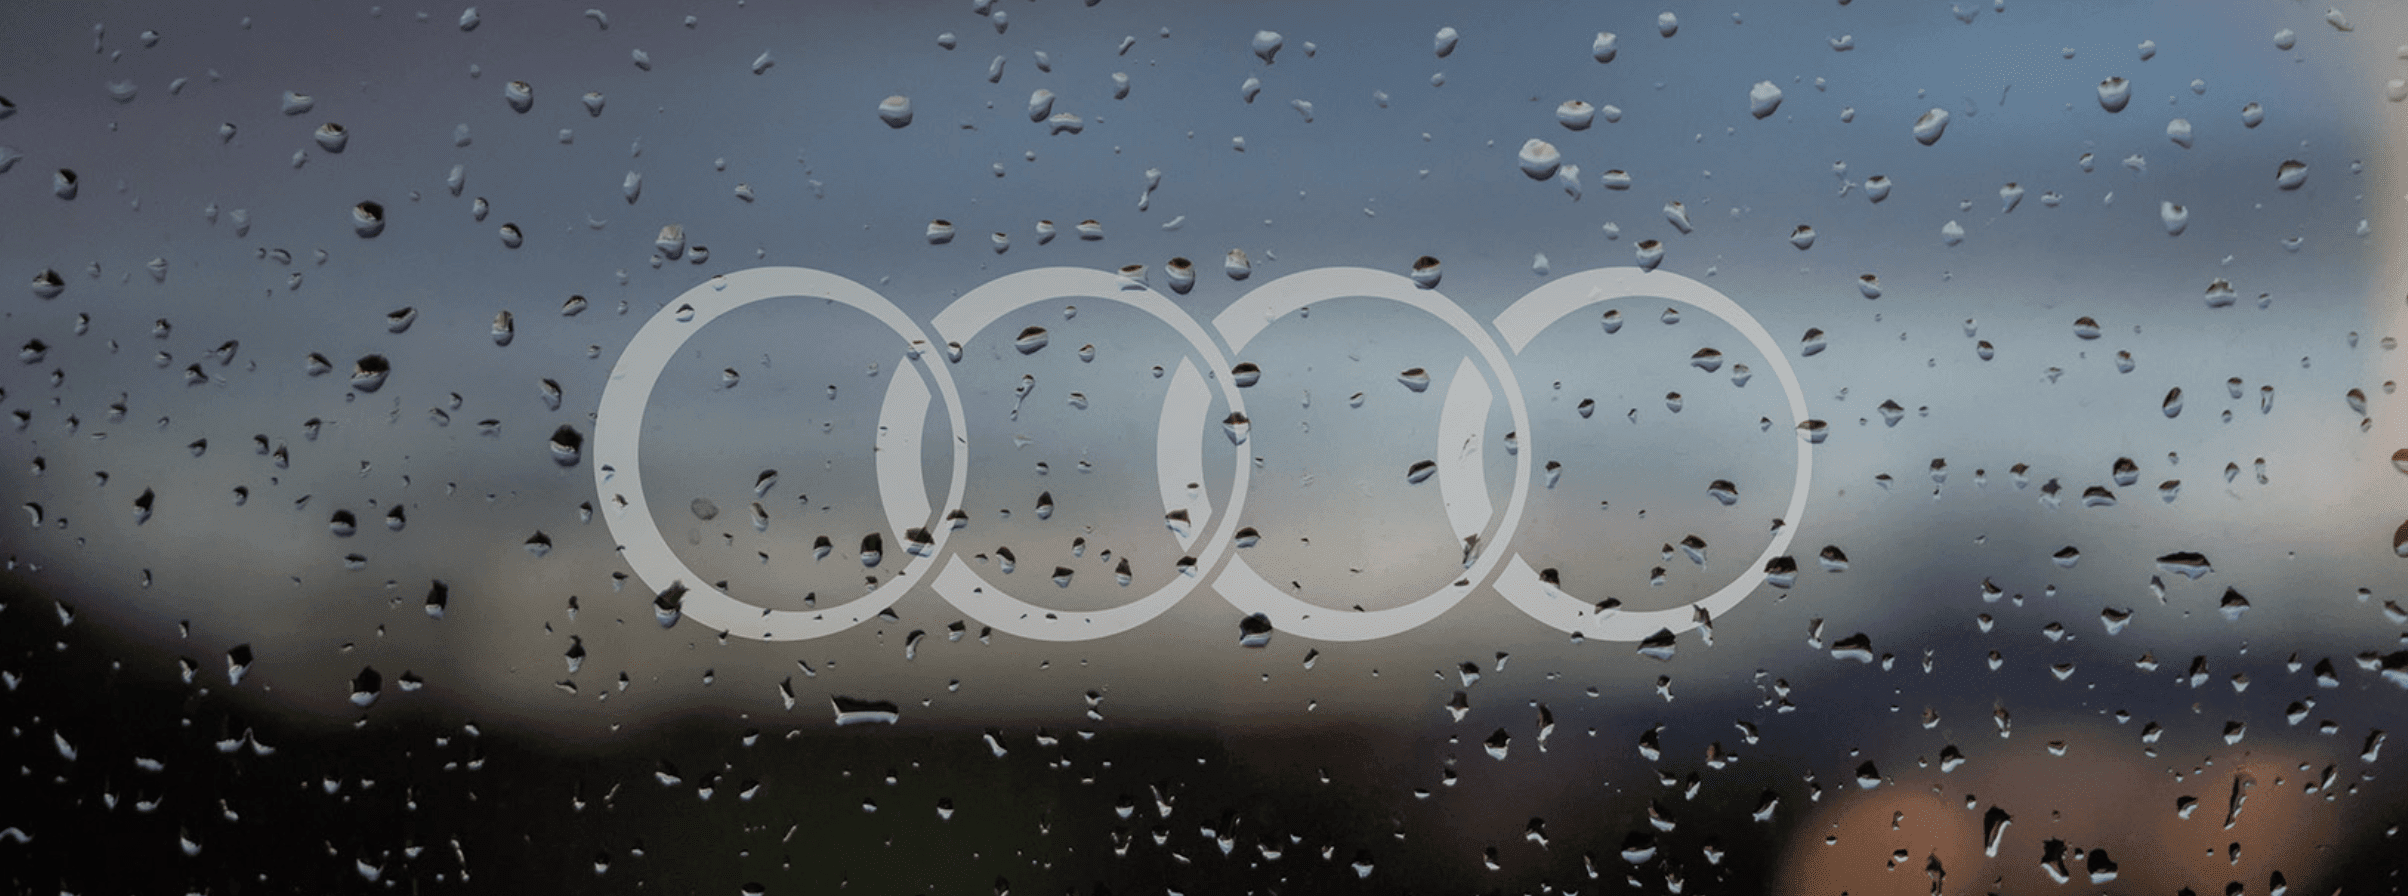 Window with rain droplets on it and the Dowell logo in the centre